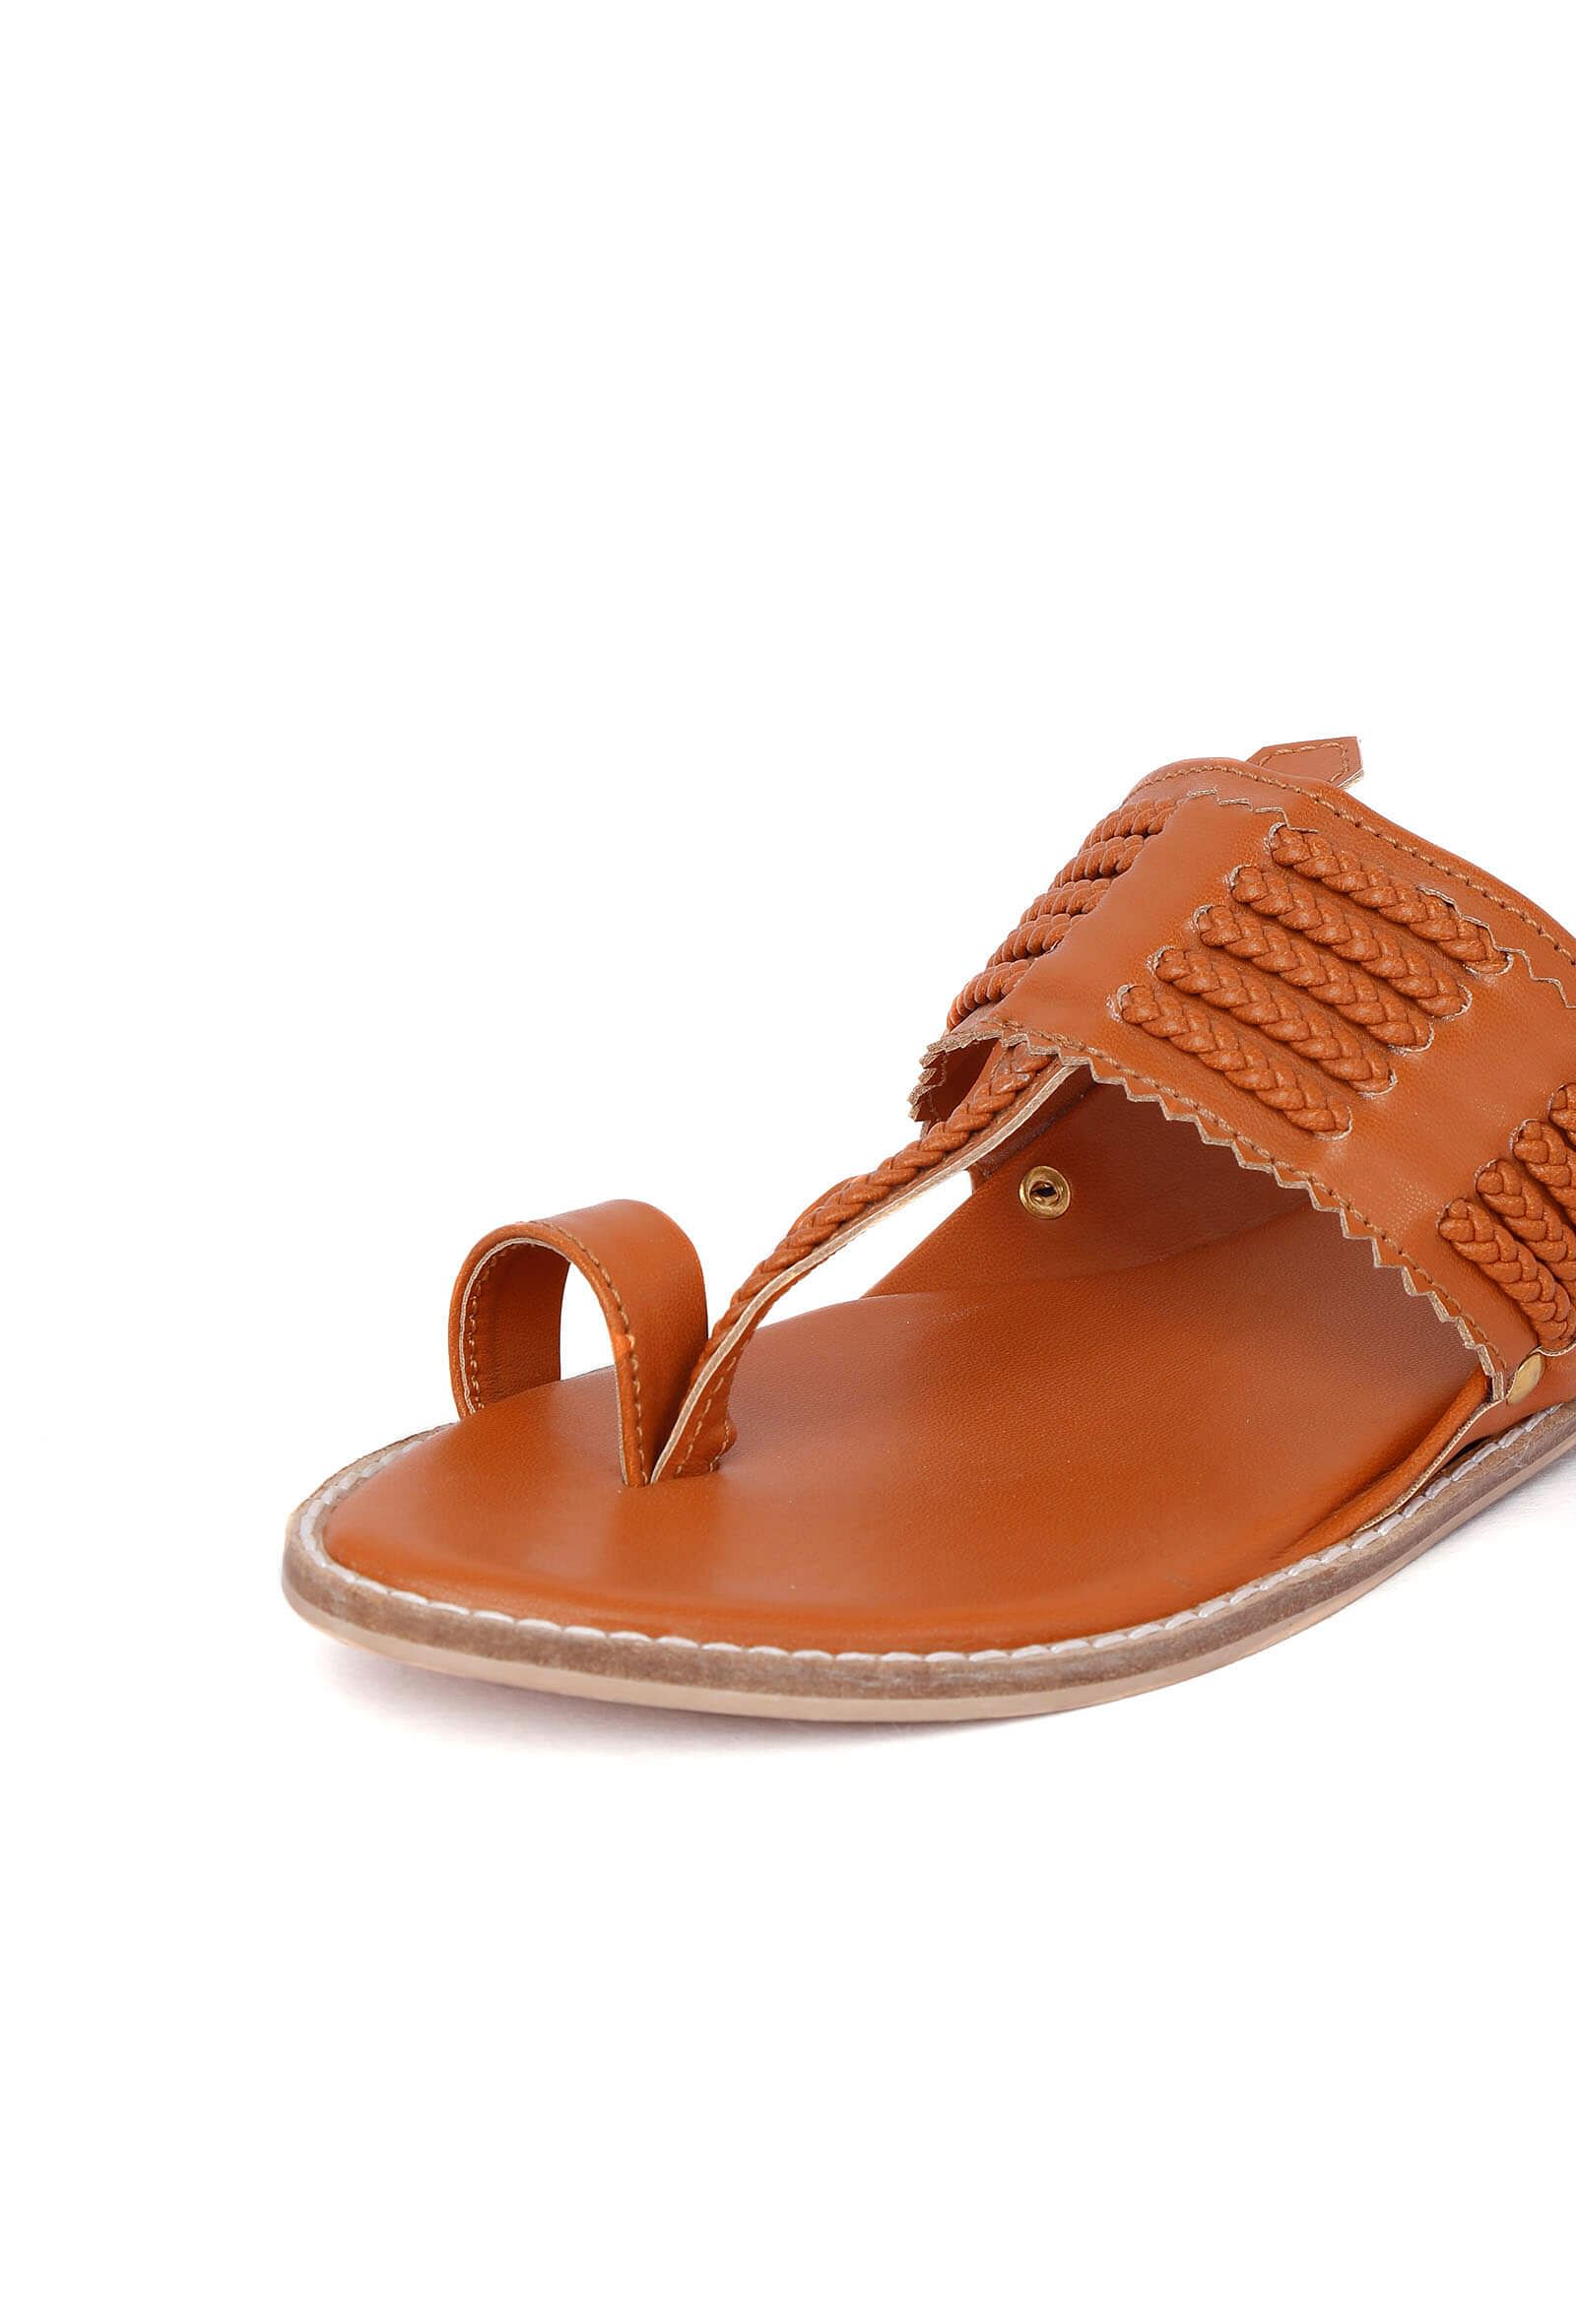 Tan Cruelty-Free Leather Sandals